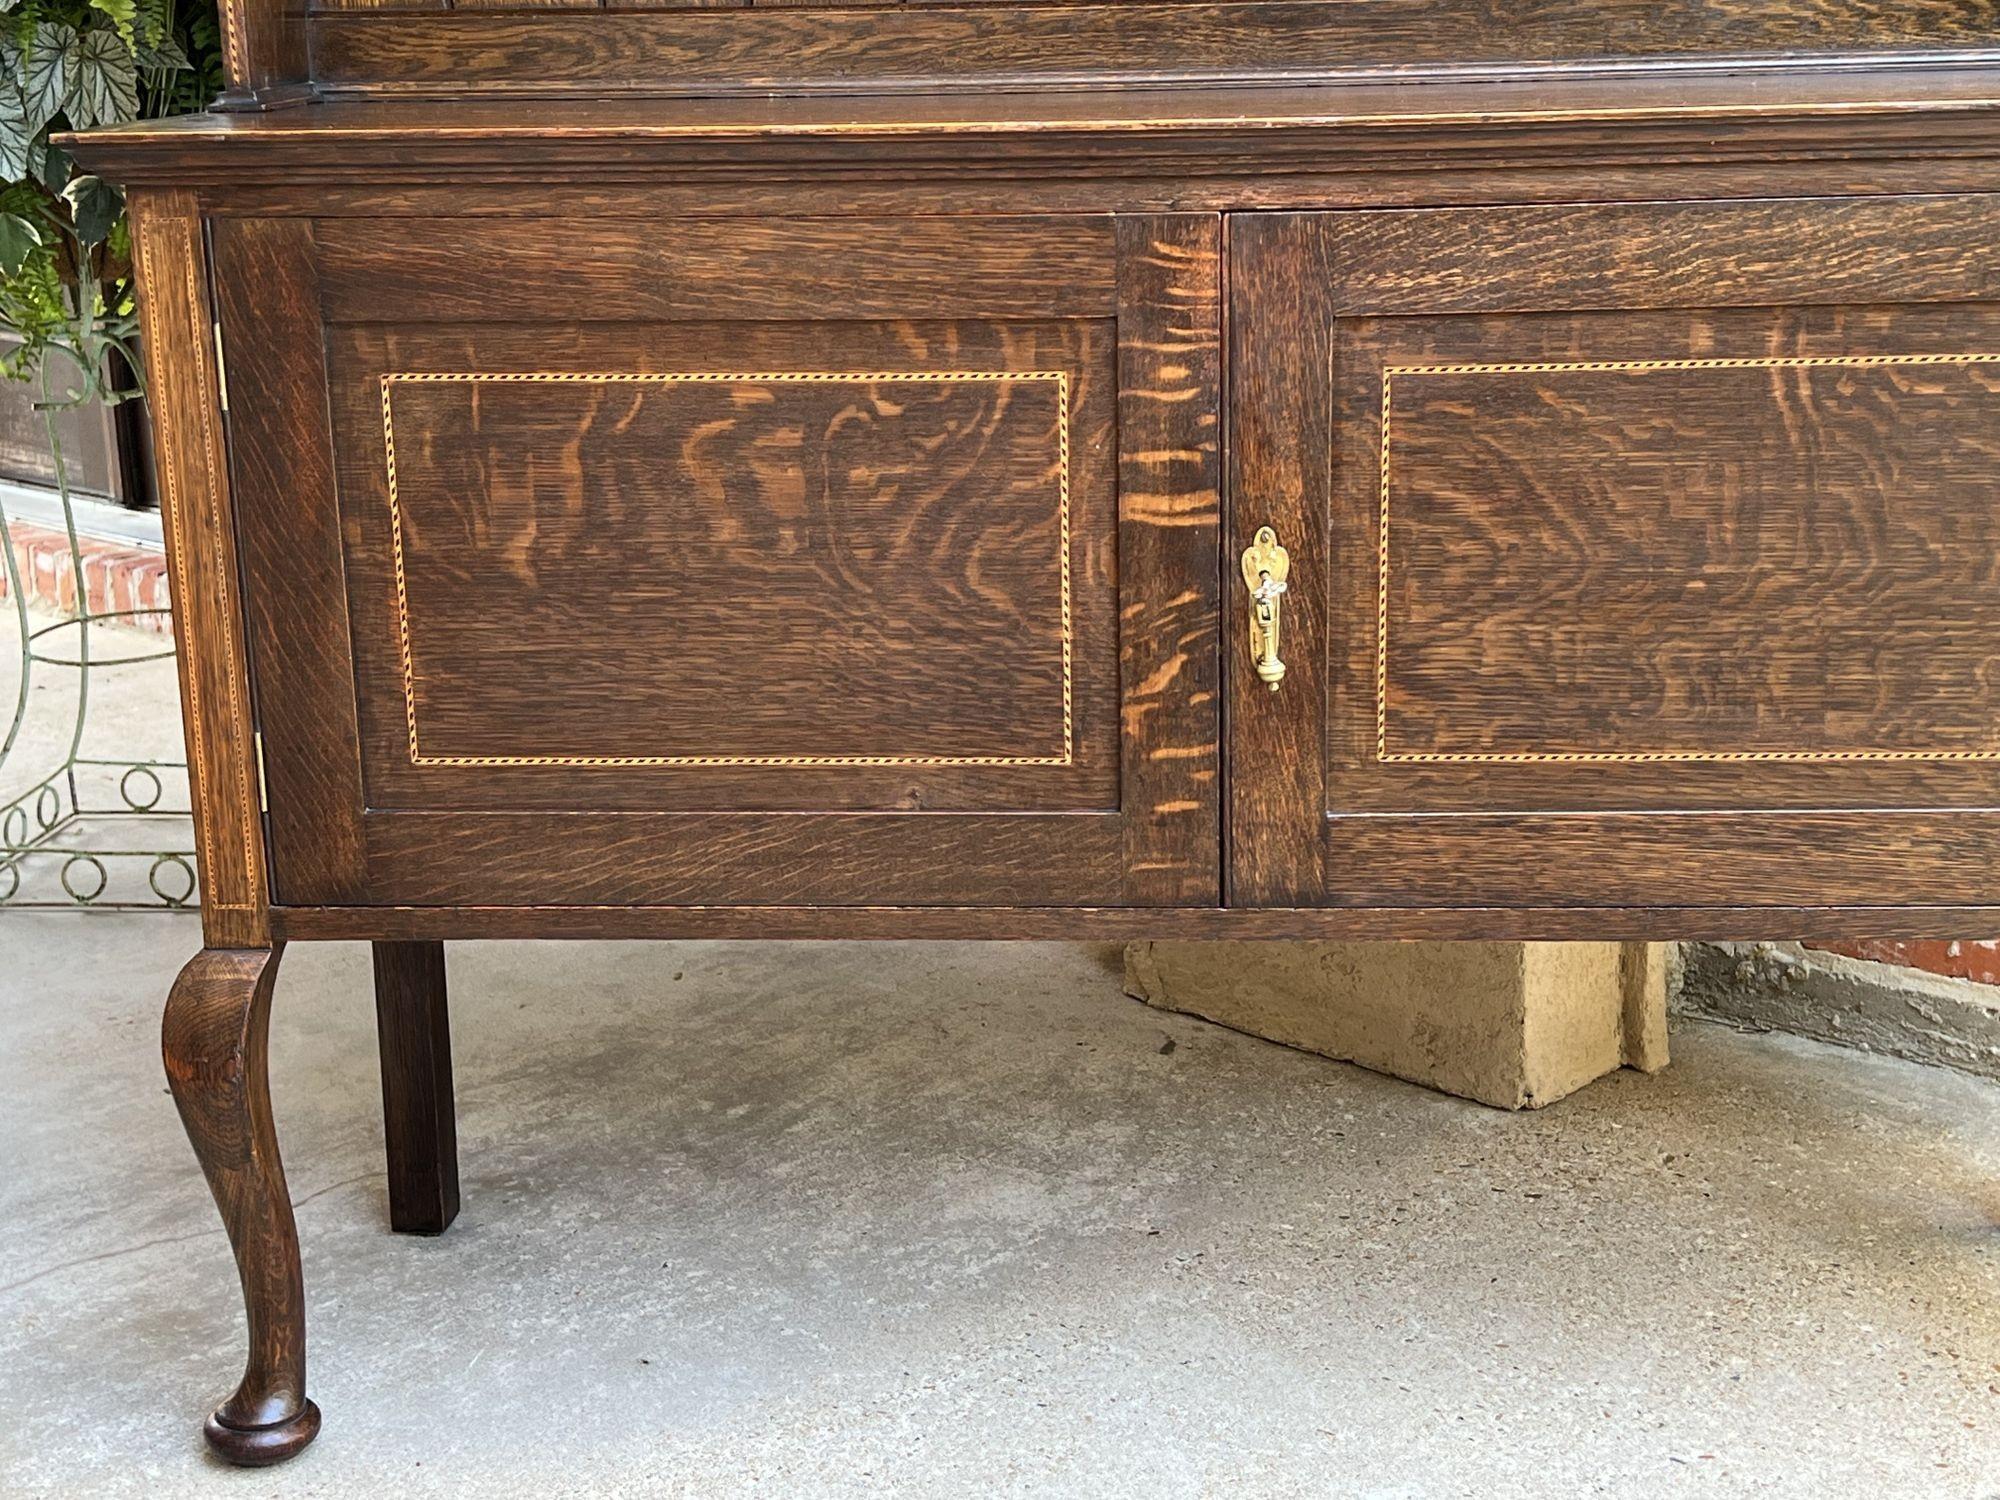 Early 20th Century Antique English Inlaid Oak Welsh Dresser Sideboard Buffet Hutch Queen Anne